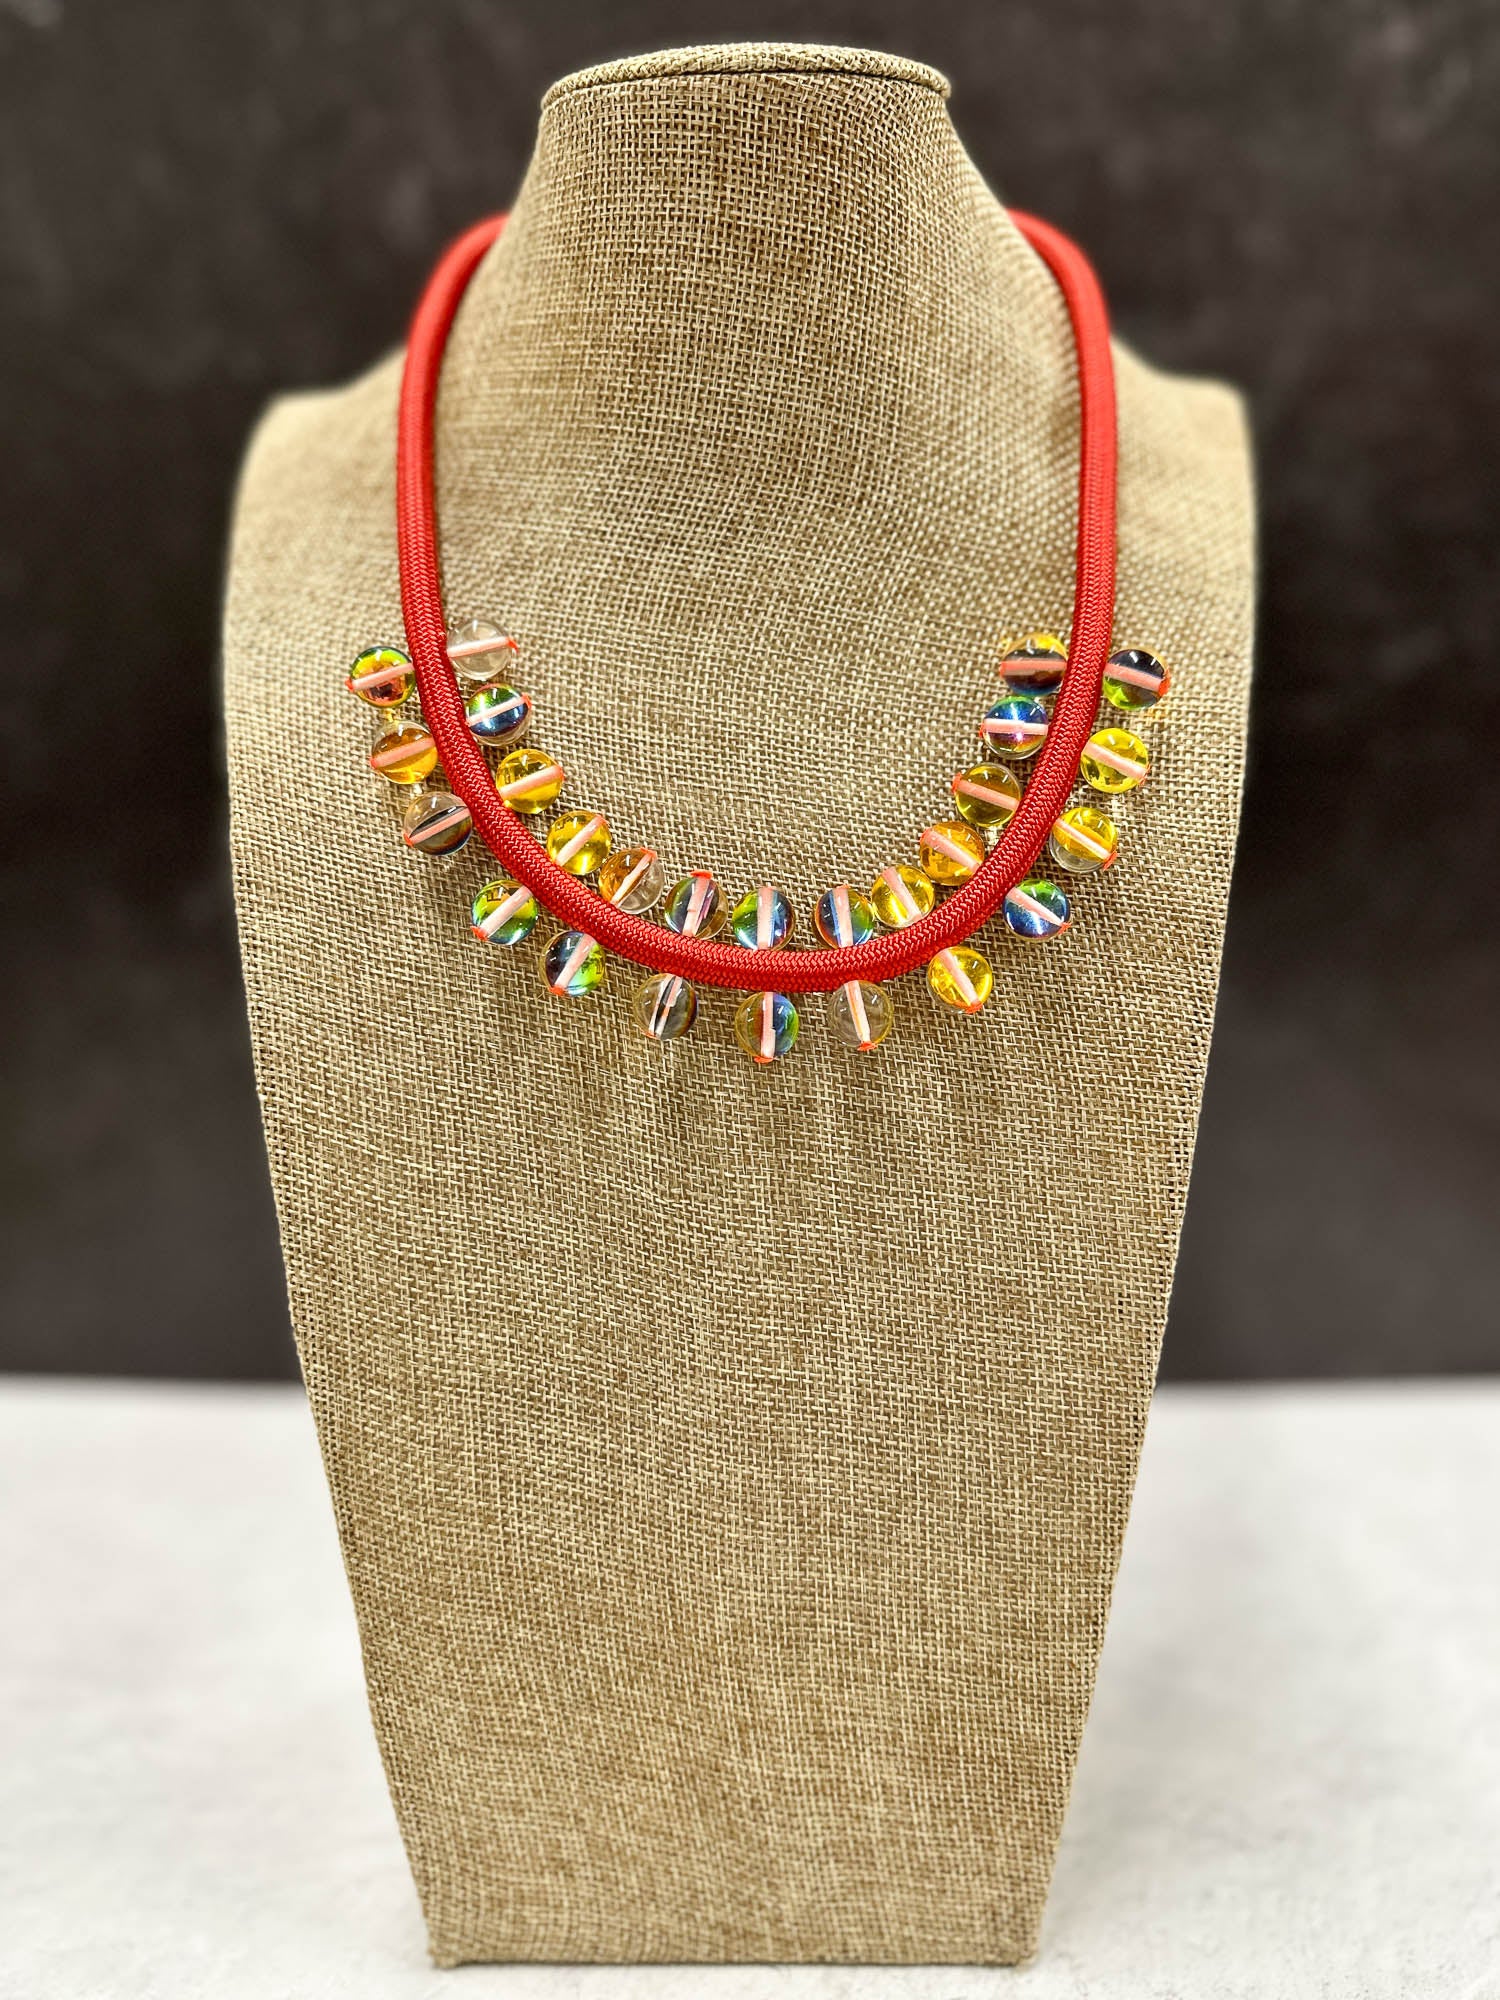 Glass Beads on Cord Necklace, Red